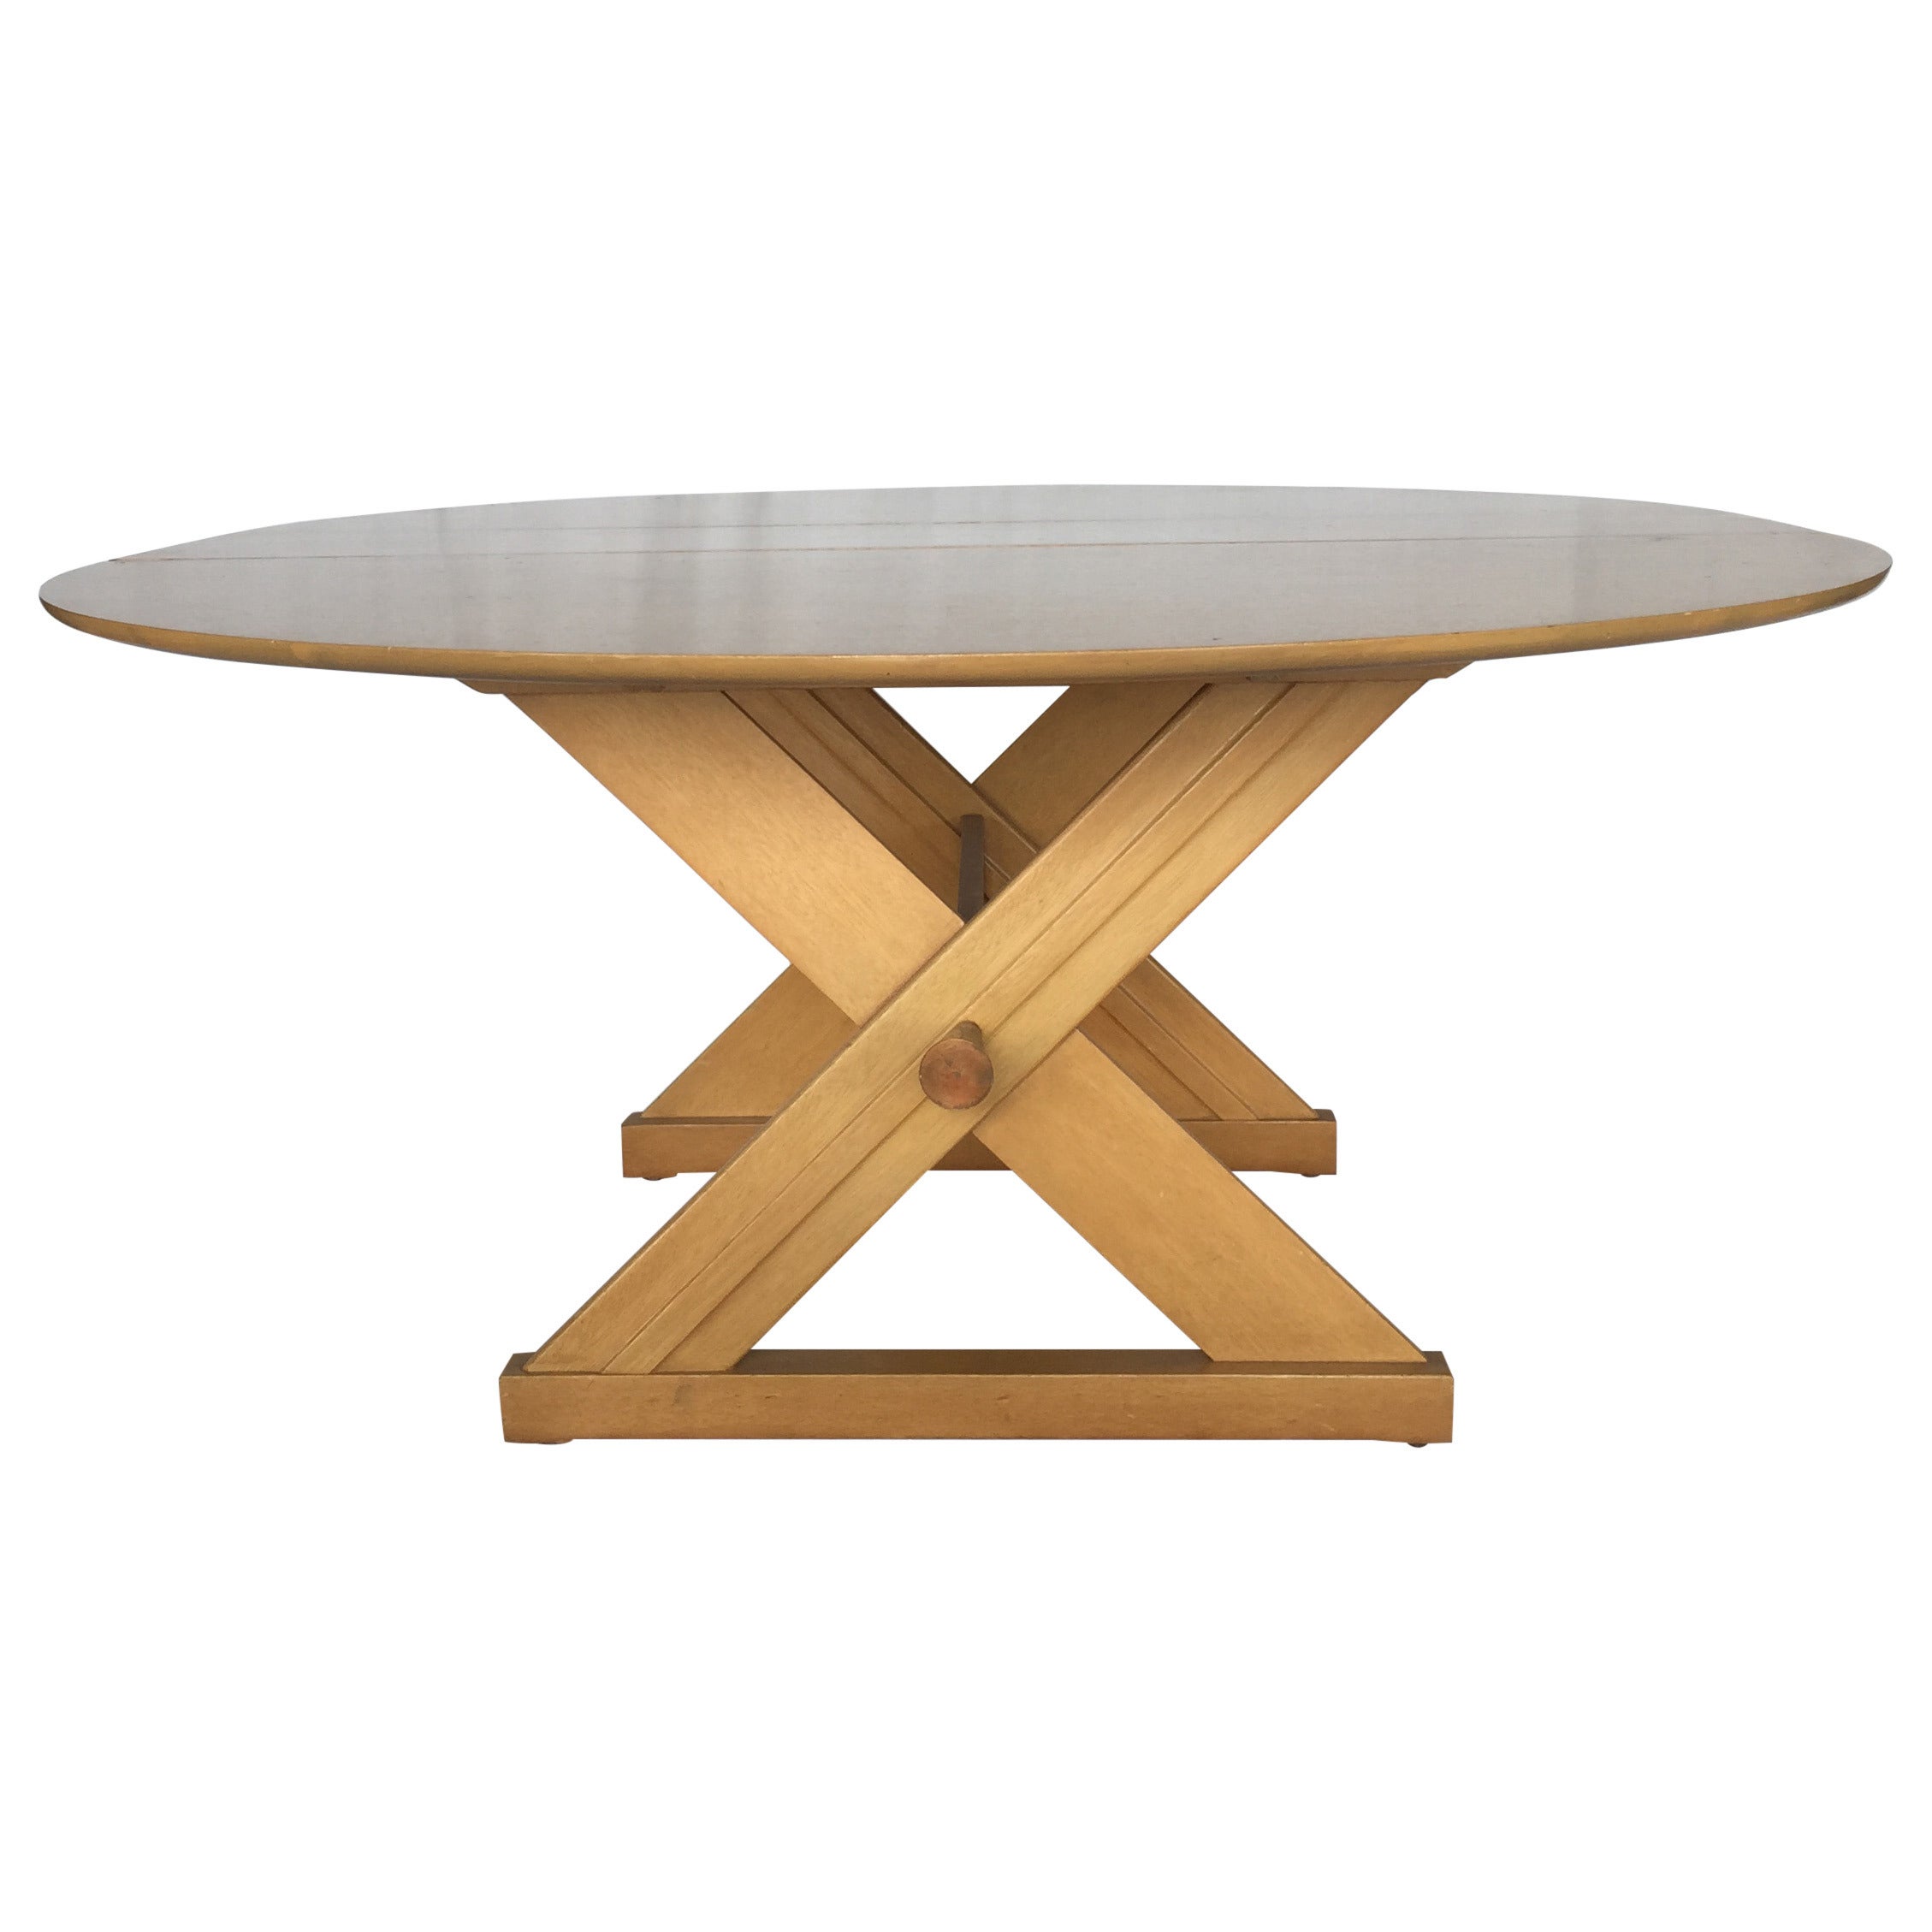 Paul Laszlo for Brown-Saltman Dining or Game Table with Copper Accents